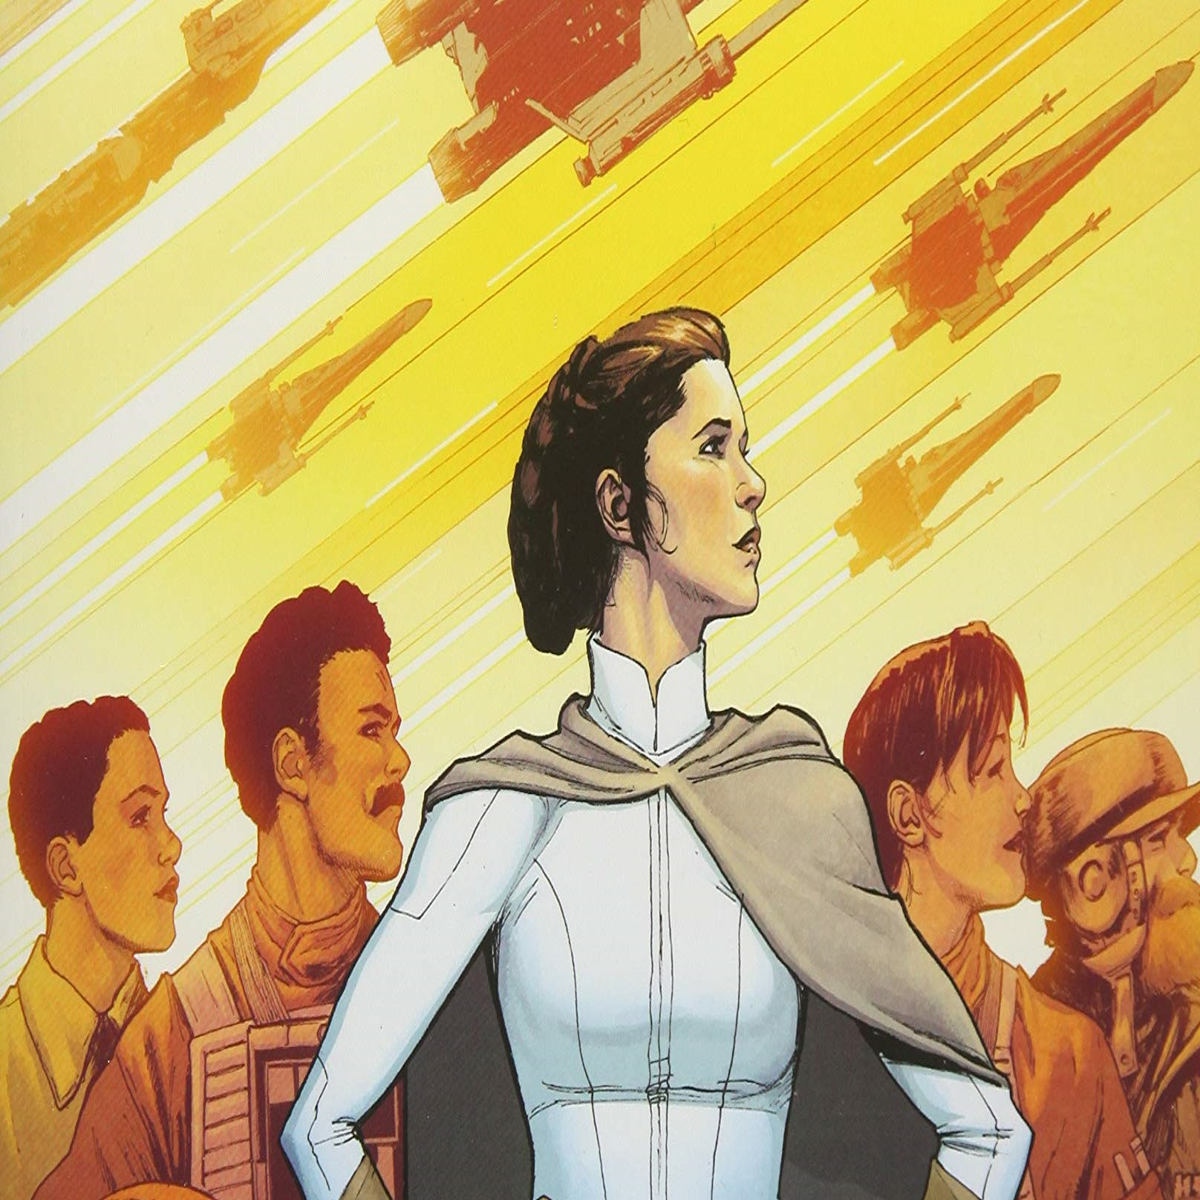 The Art of Star Wars: The Last Jedi Announced at San Diego Comic